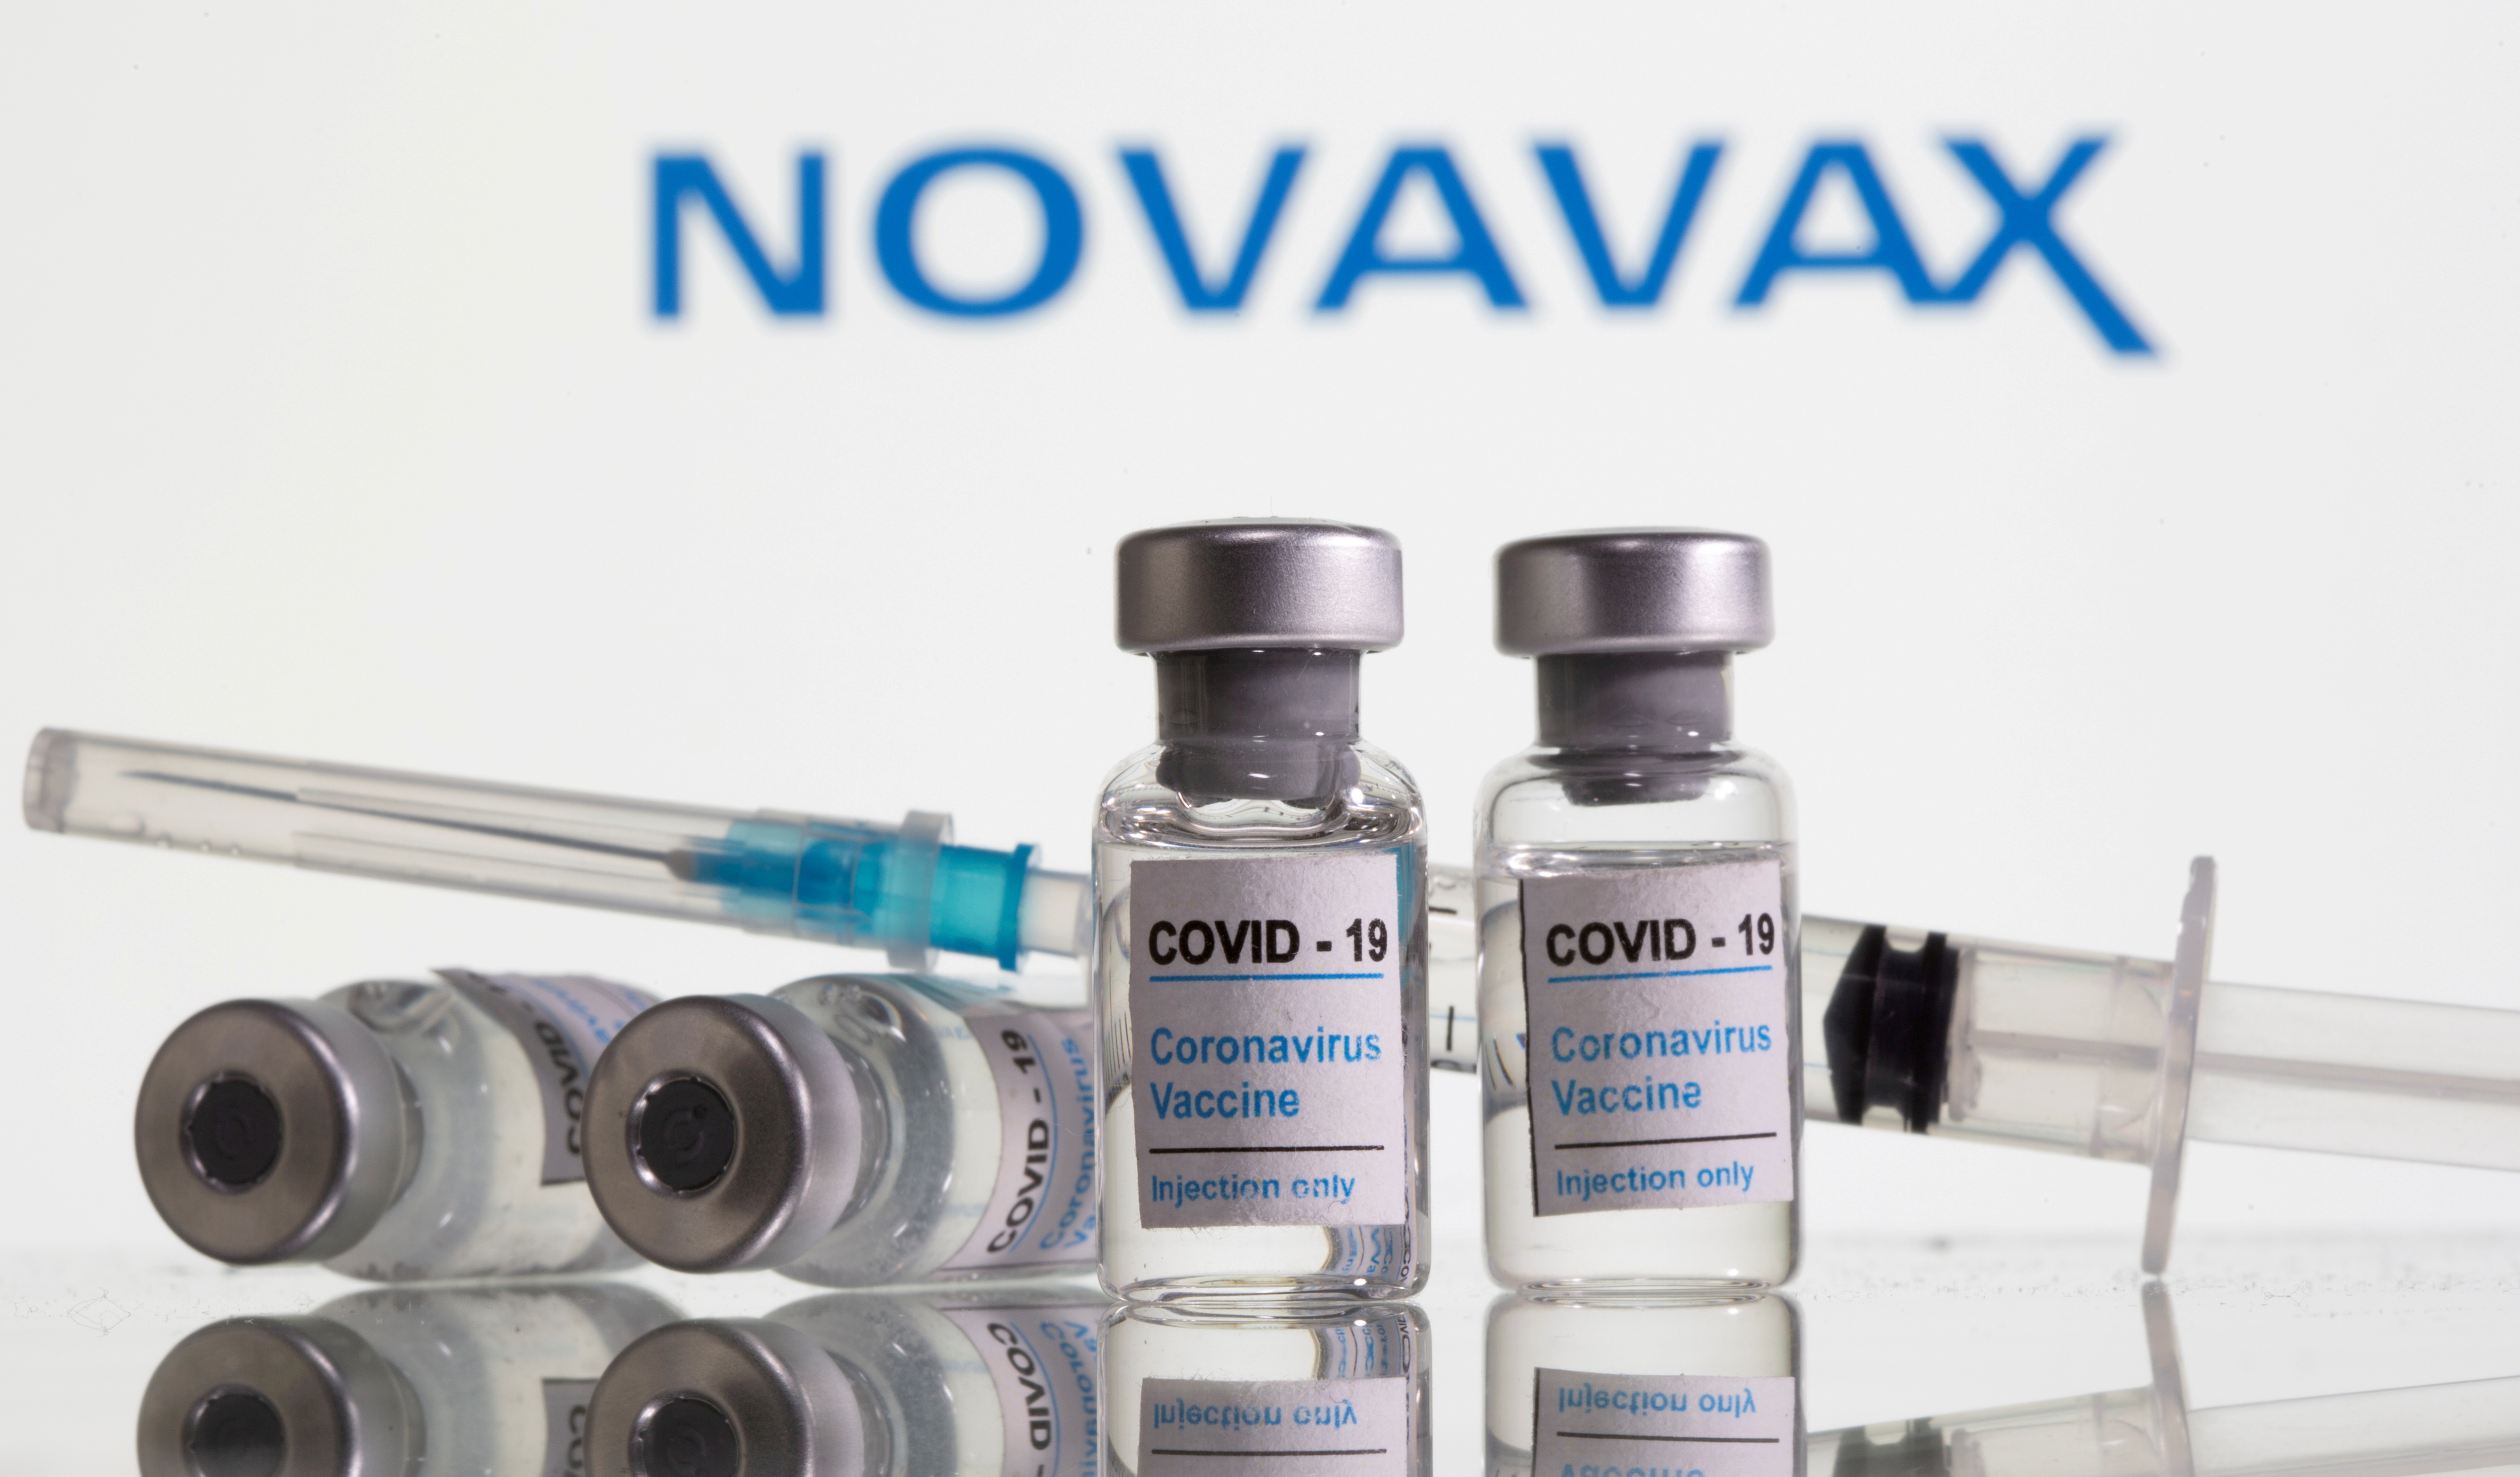 &copy; Reuters. FILE PHOTO: Vials labelled "COVID-19 Coronavirus Vaccine" and syringe are seen in front of displayed Novavax logo in this illustration taken, February 9, 2021. REUTERS/Dado Ruvic/Illustration/File Photo